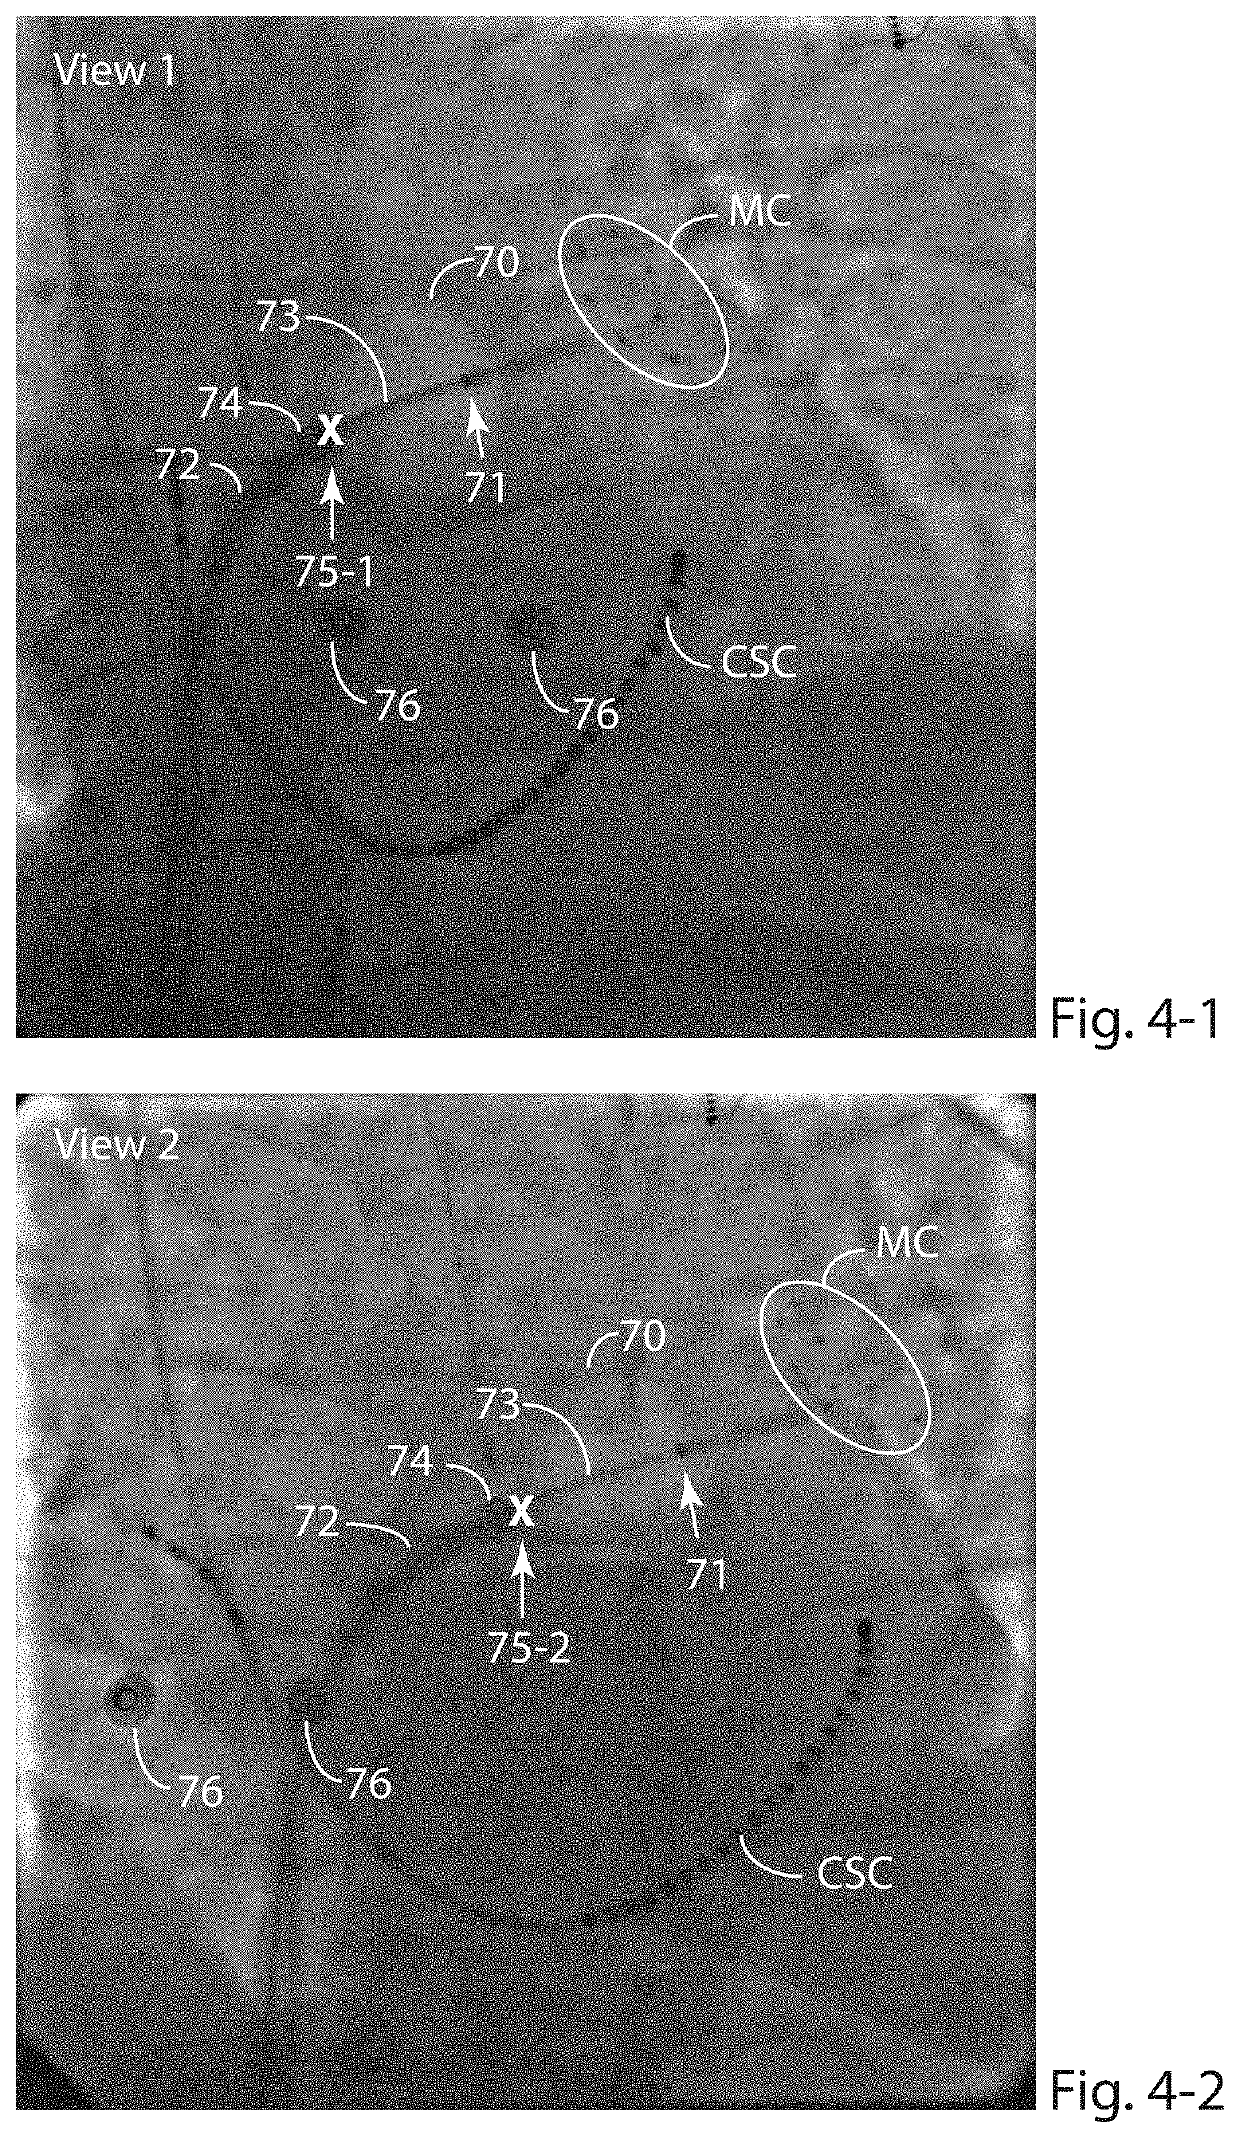 Determining and displaying the 3D location and orientation of a cardiac-ablation balloon